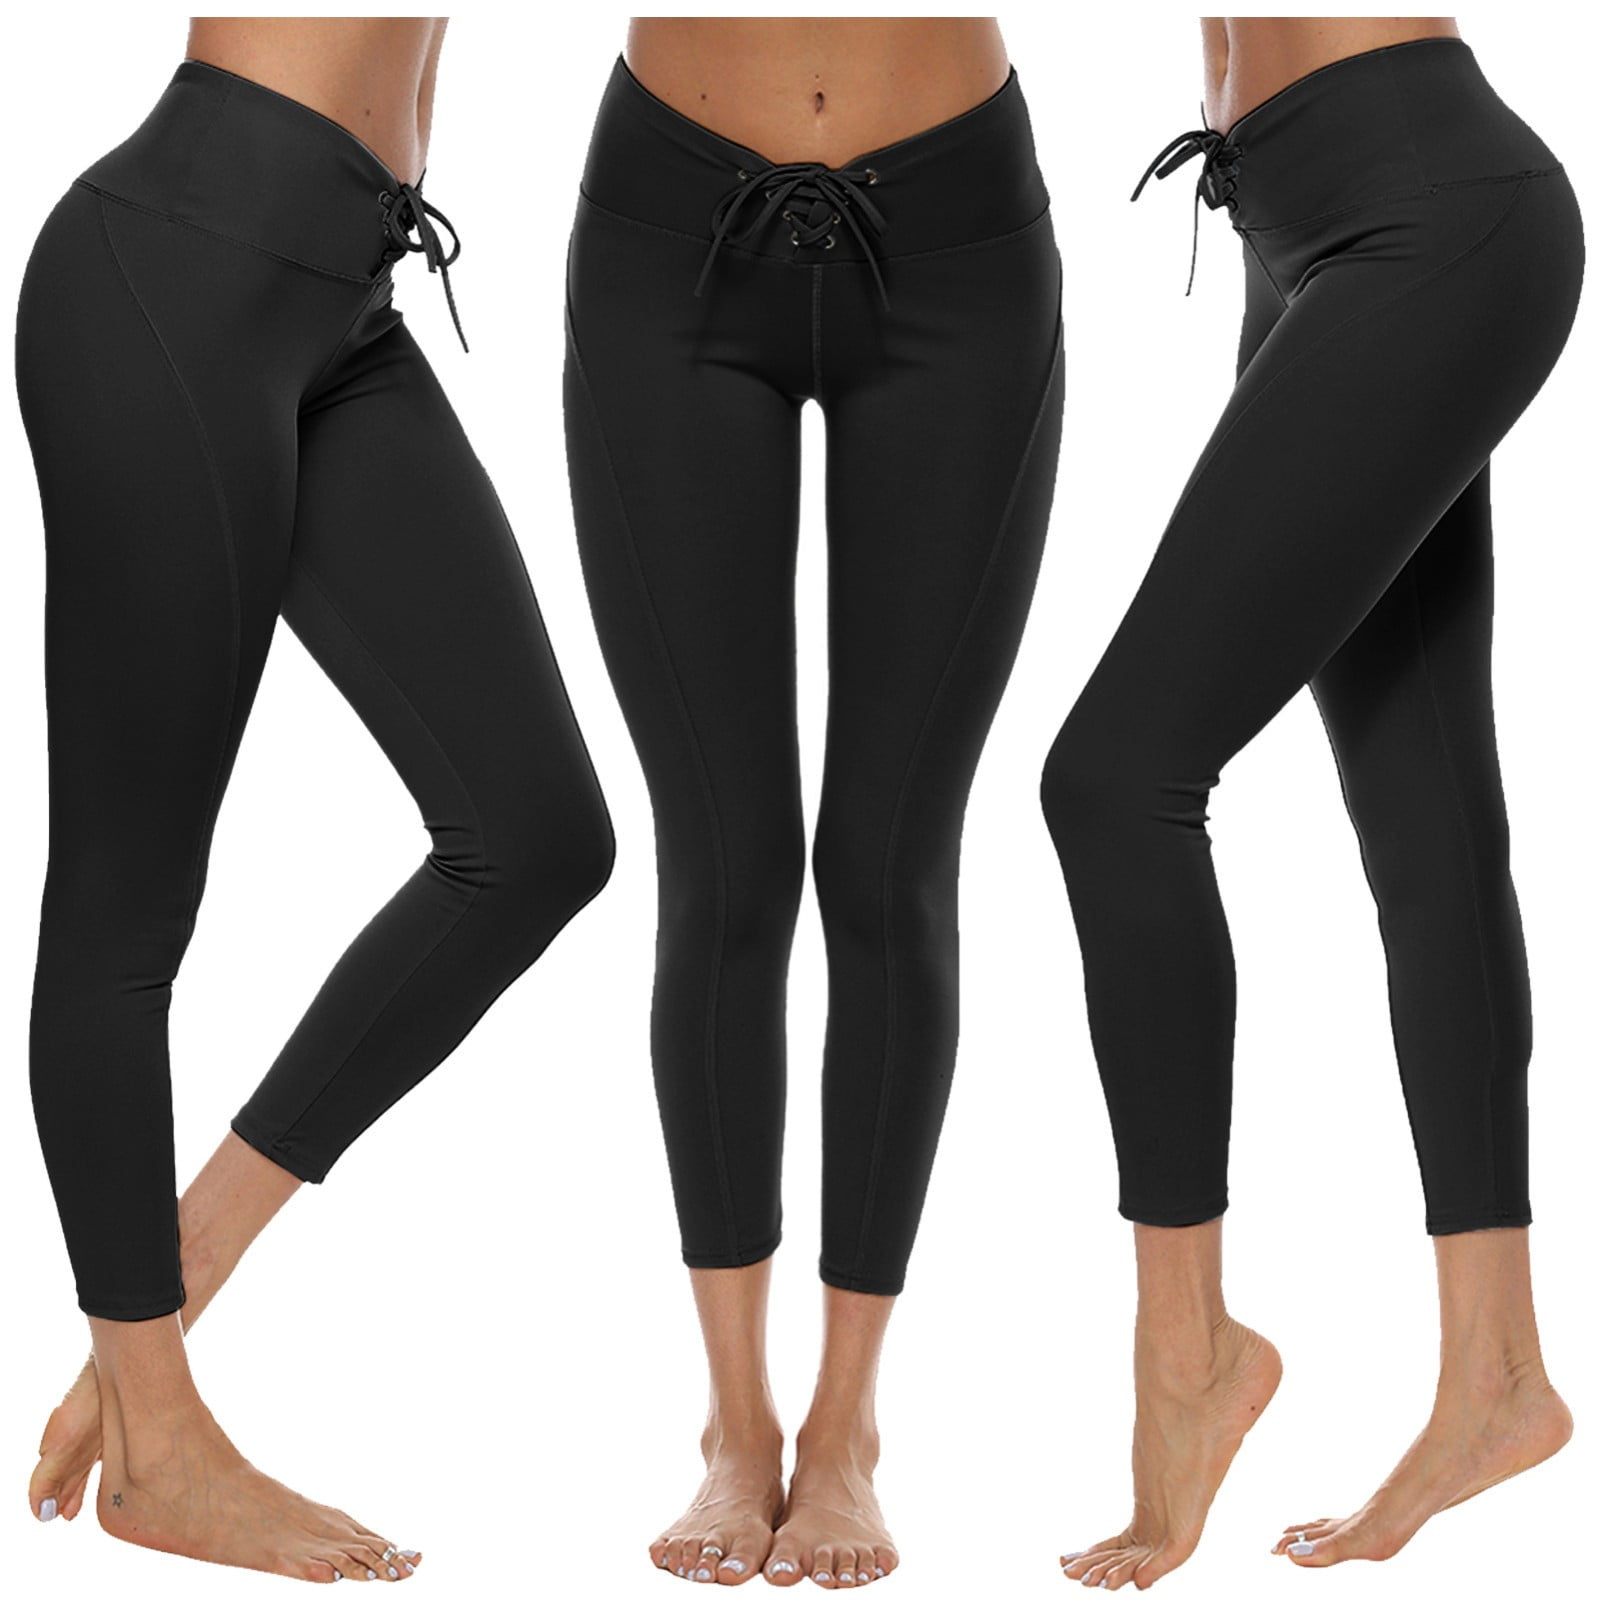 Ayolanni Workout Leggings Women's Fitness Sports Stretch High